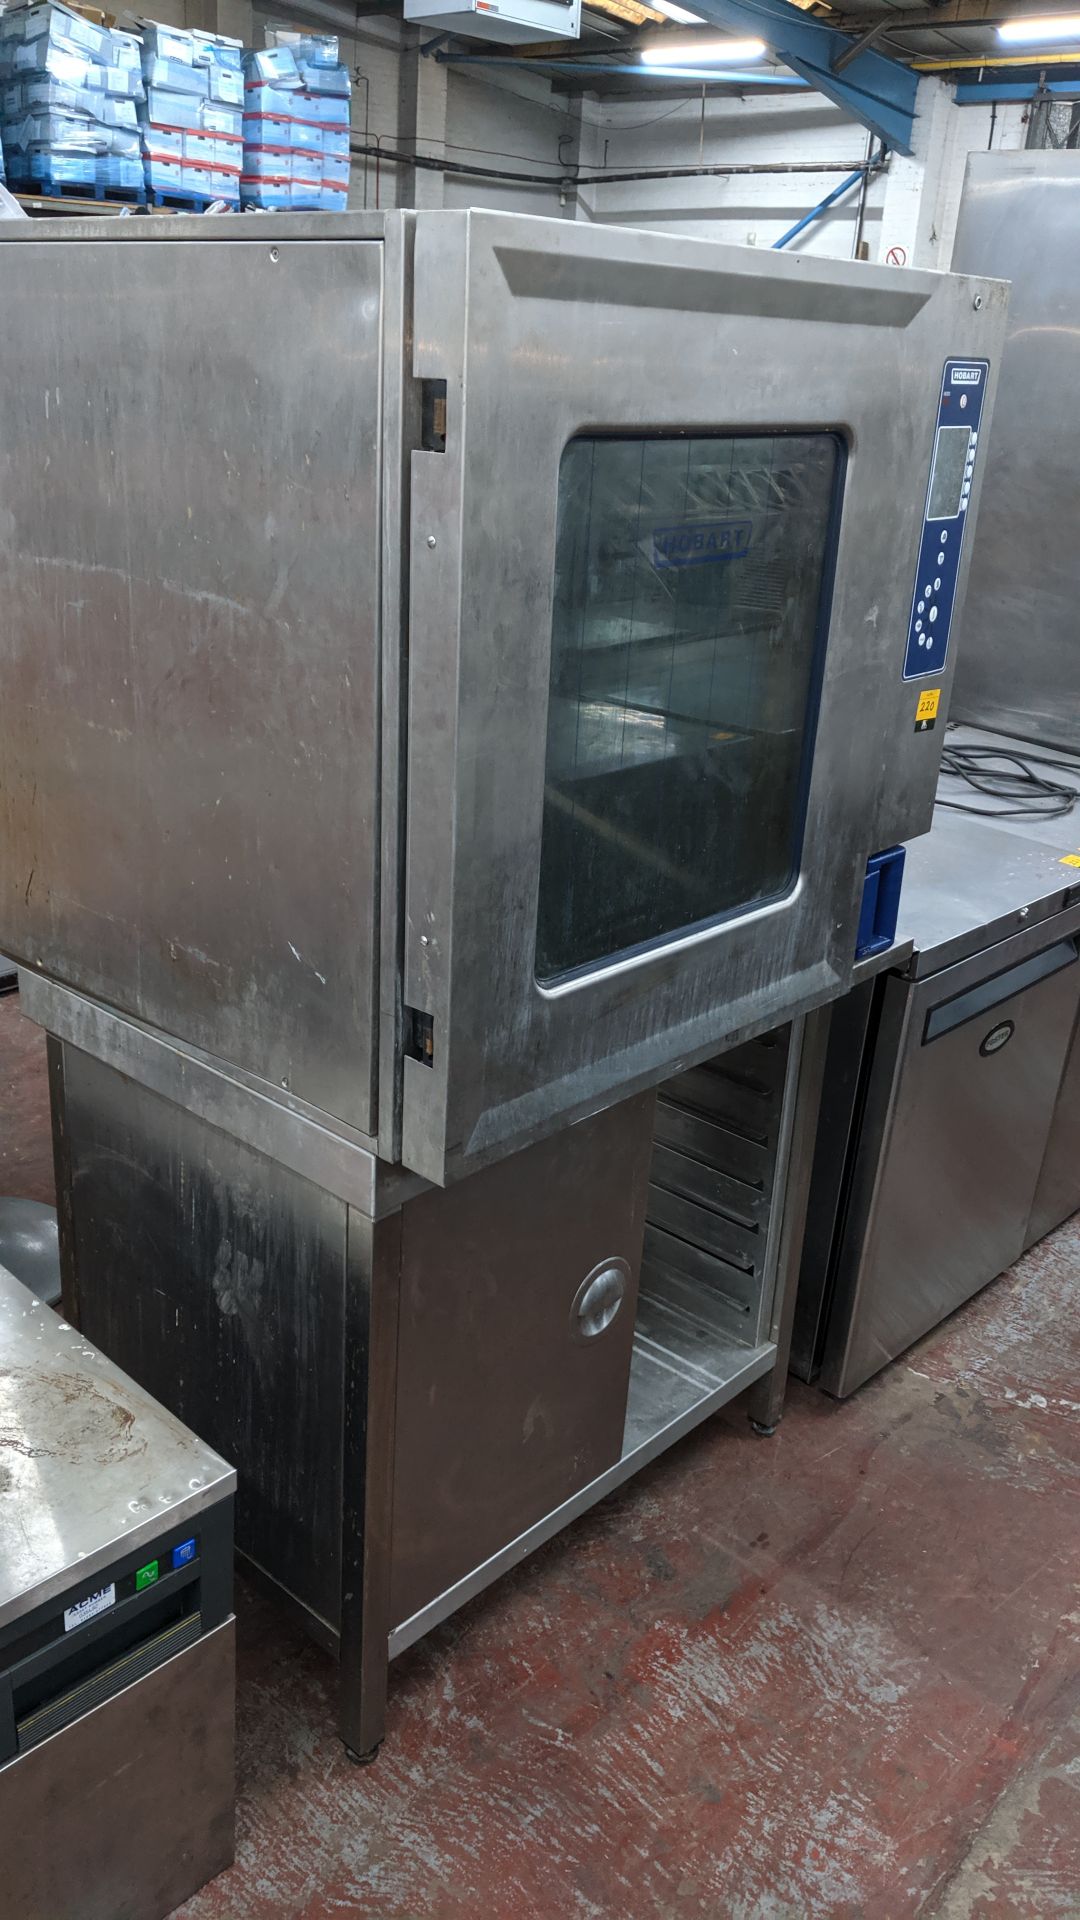 Hobart oven on dedicated stand incorporating tray holding section. IMPORTANT: Please remember